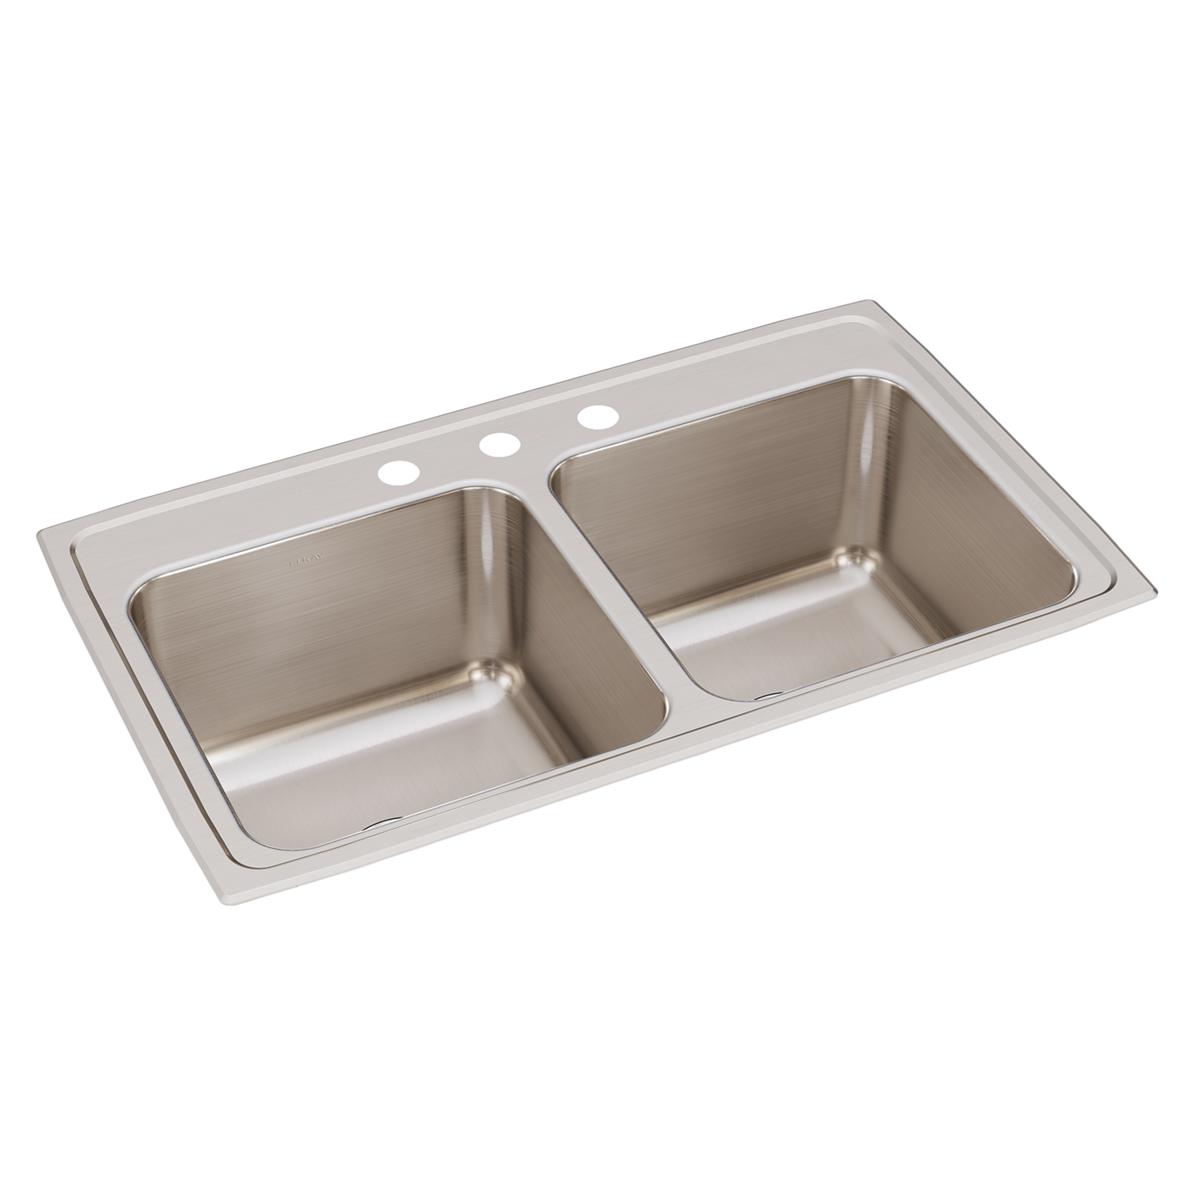 Elkay Lustertone Classic 33" x 19-1/2" x 10-1/8" Equal Double Bowl Drop-in Sink with Quick-clip